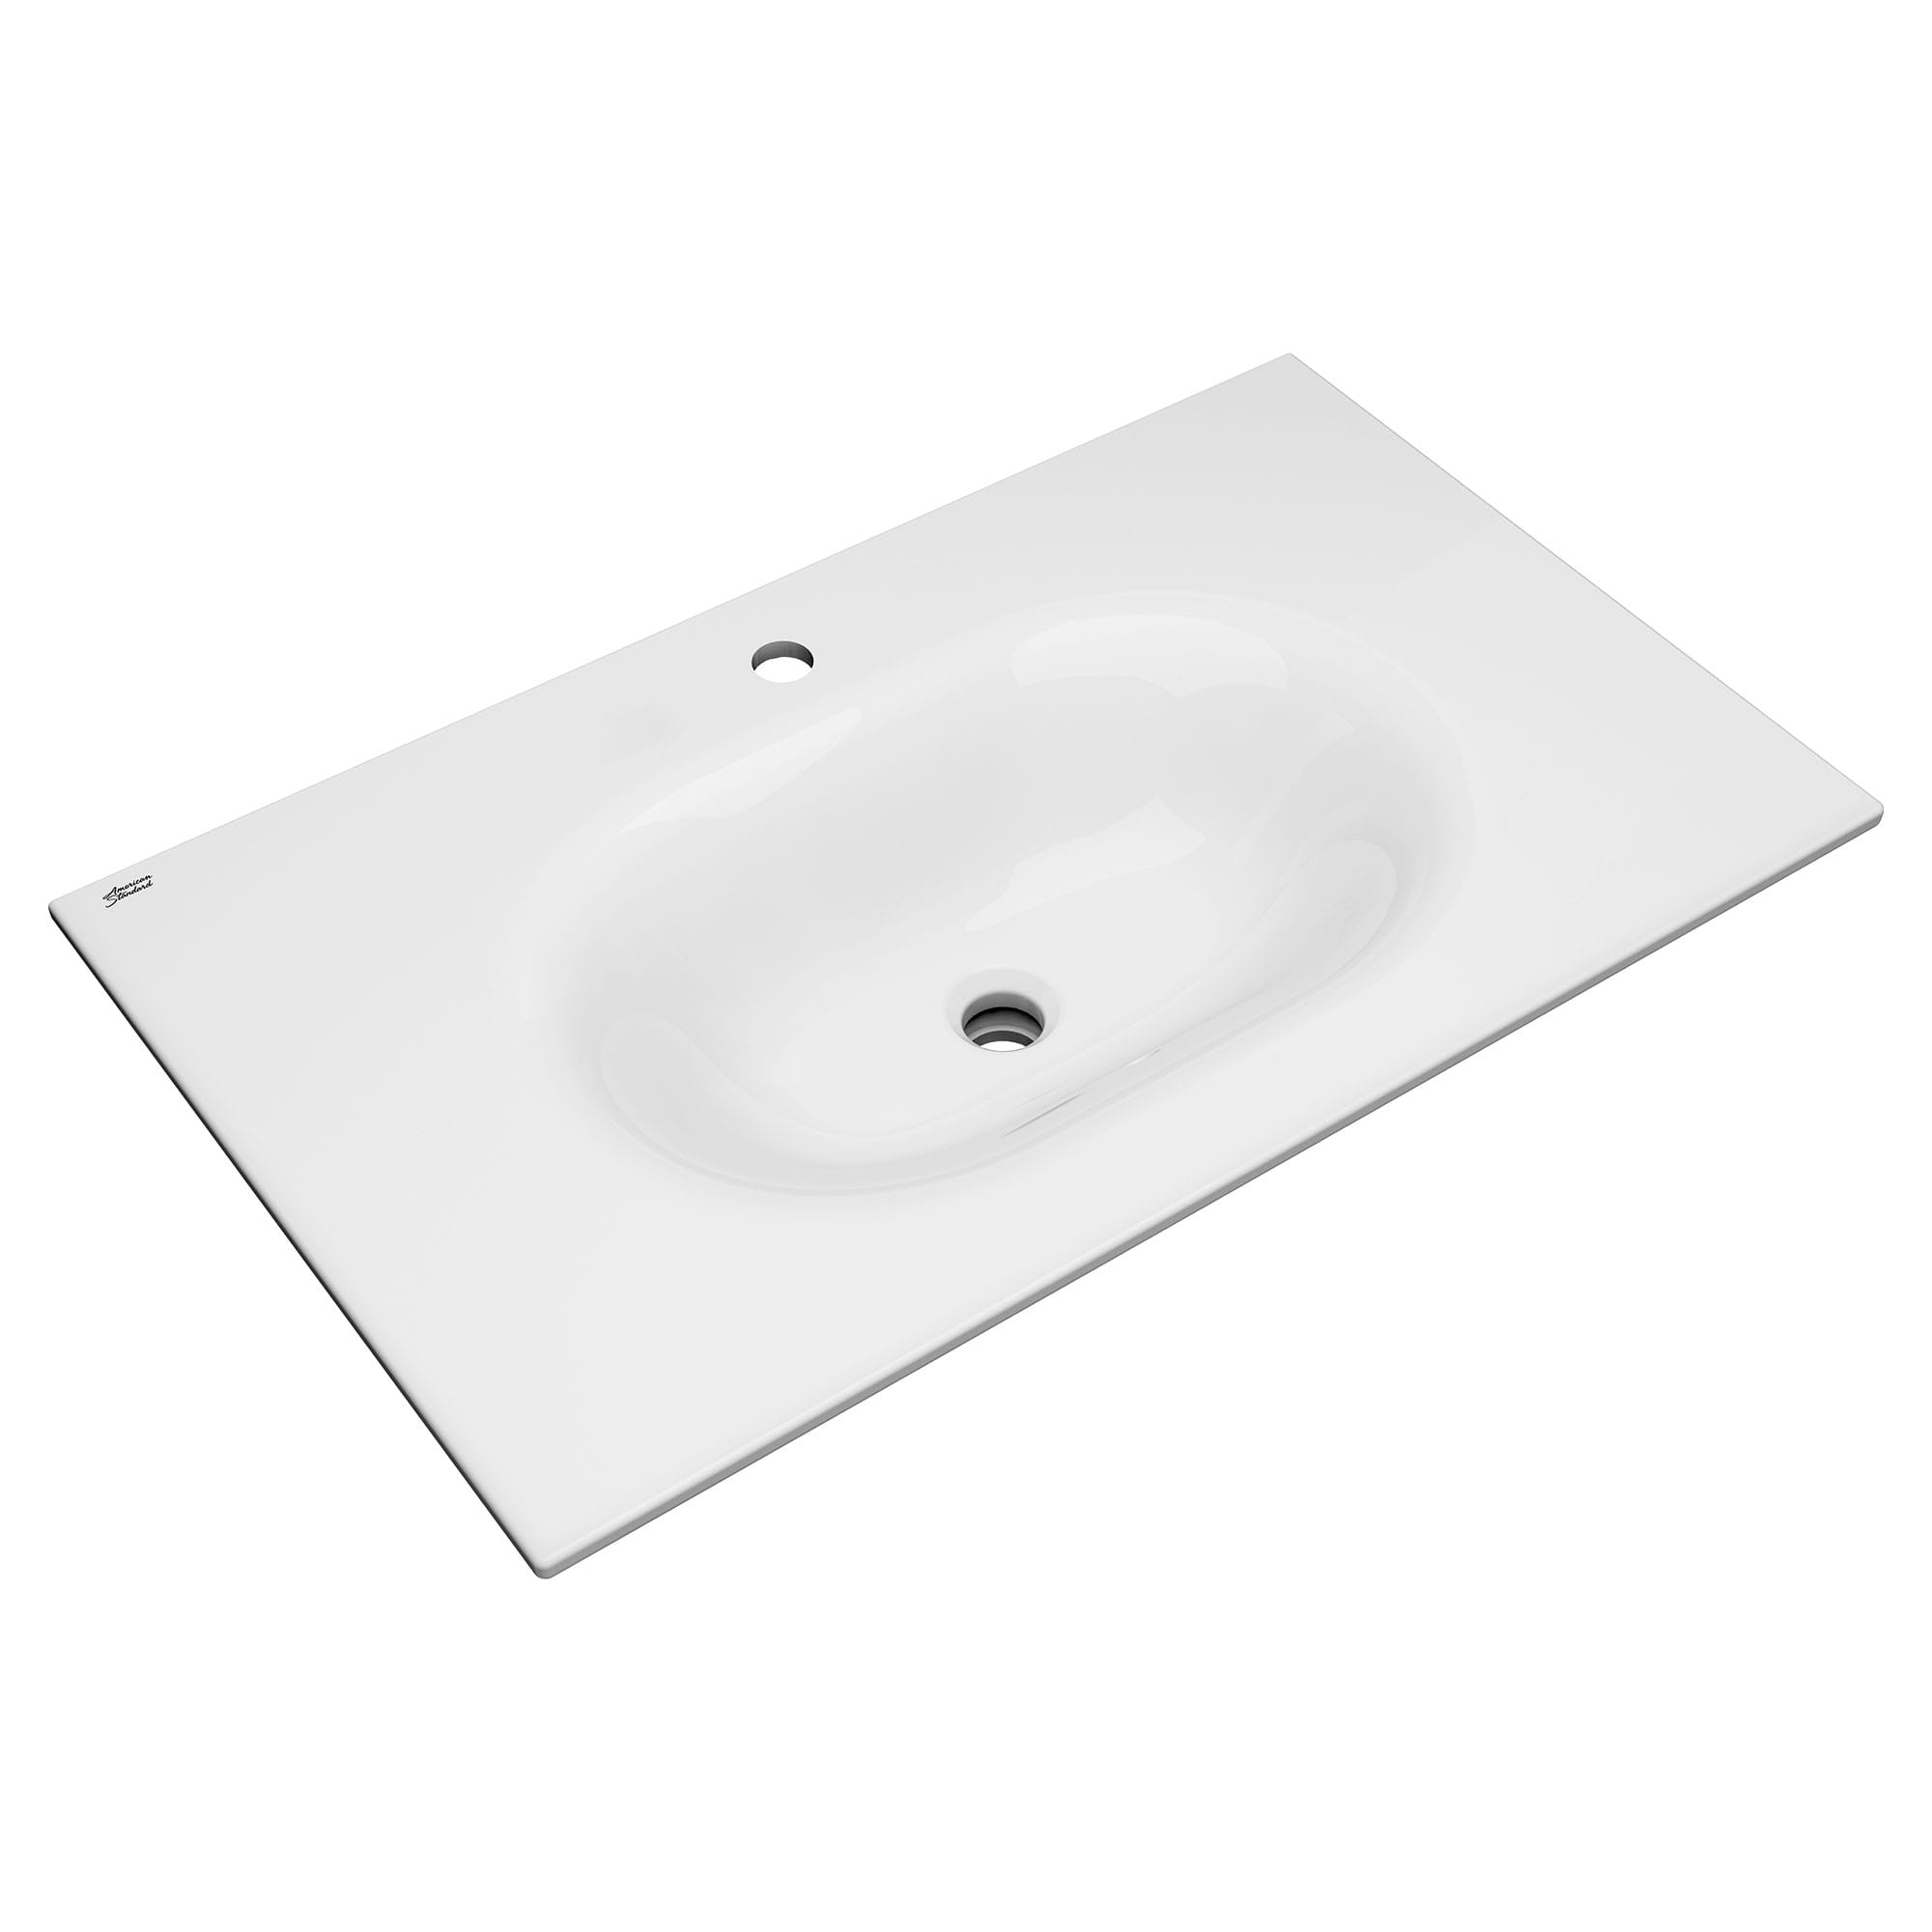 Studio S 33 Inch Vitreous China Vanity Sink Top Center Hole Only WHITE